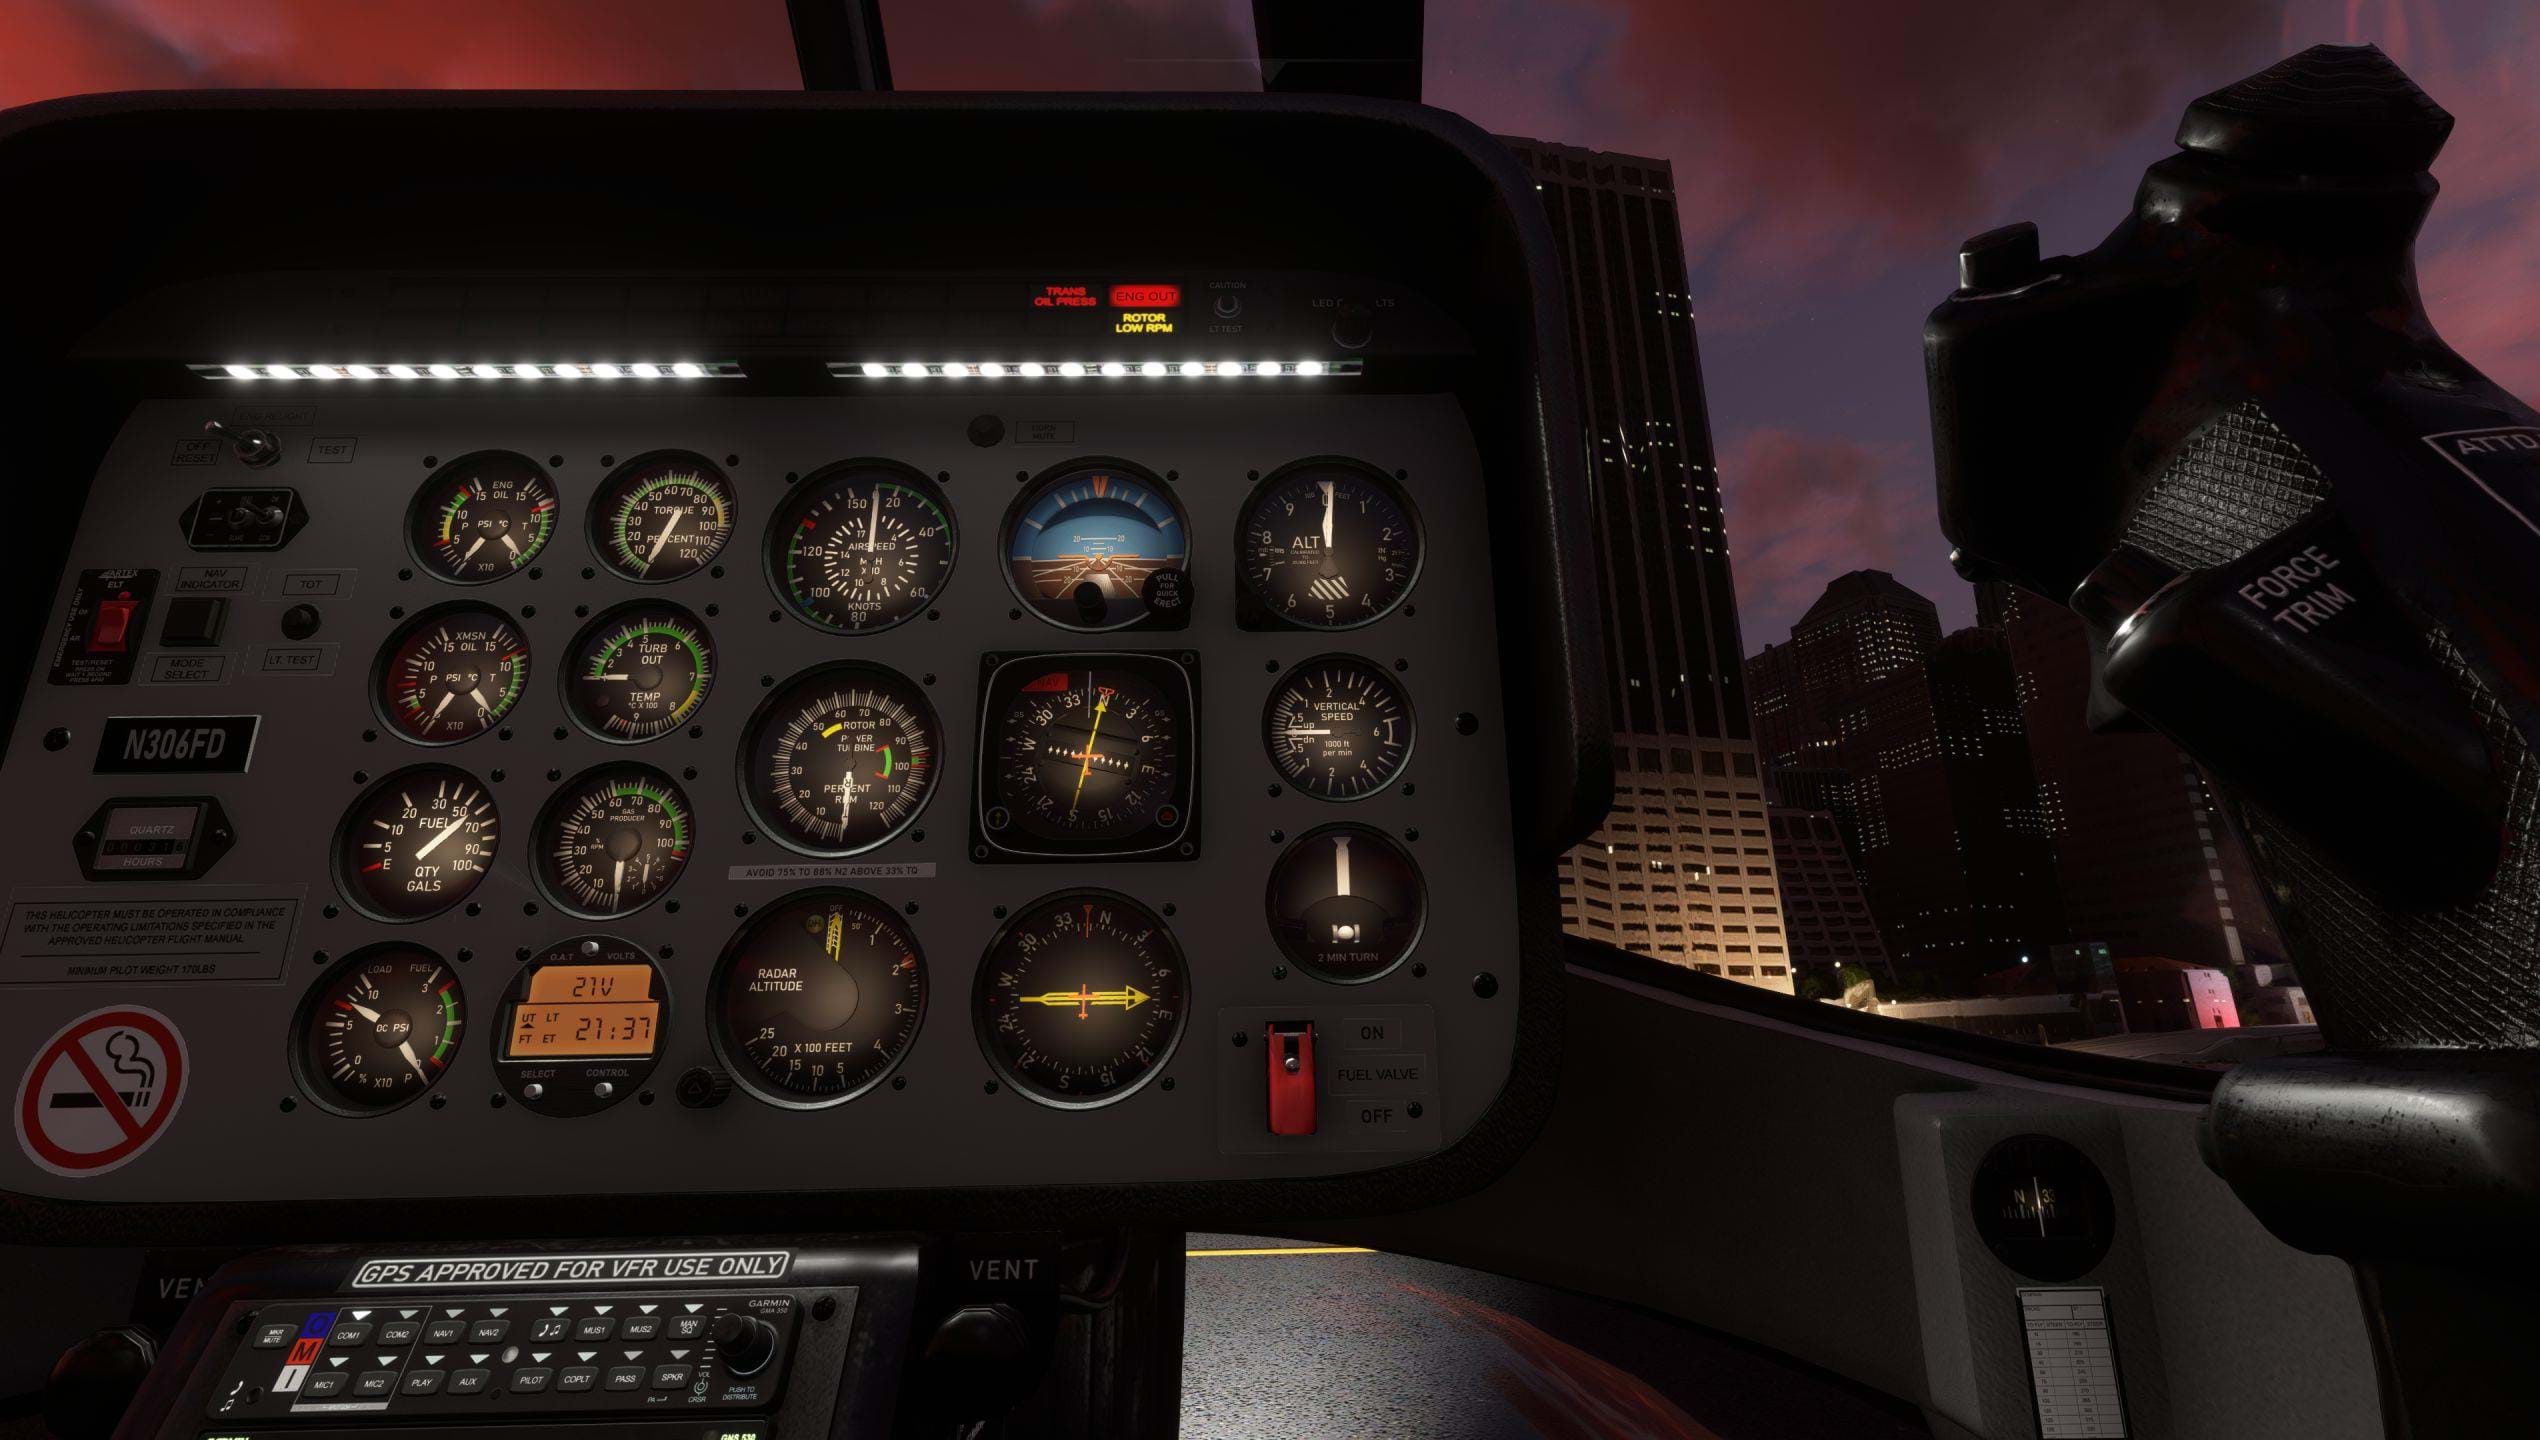 Released!) Cowan Simulation announces a new helicopter for MSFS